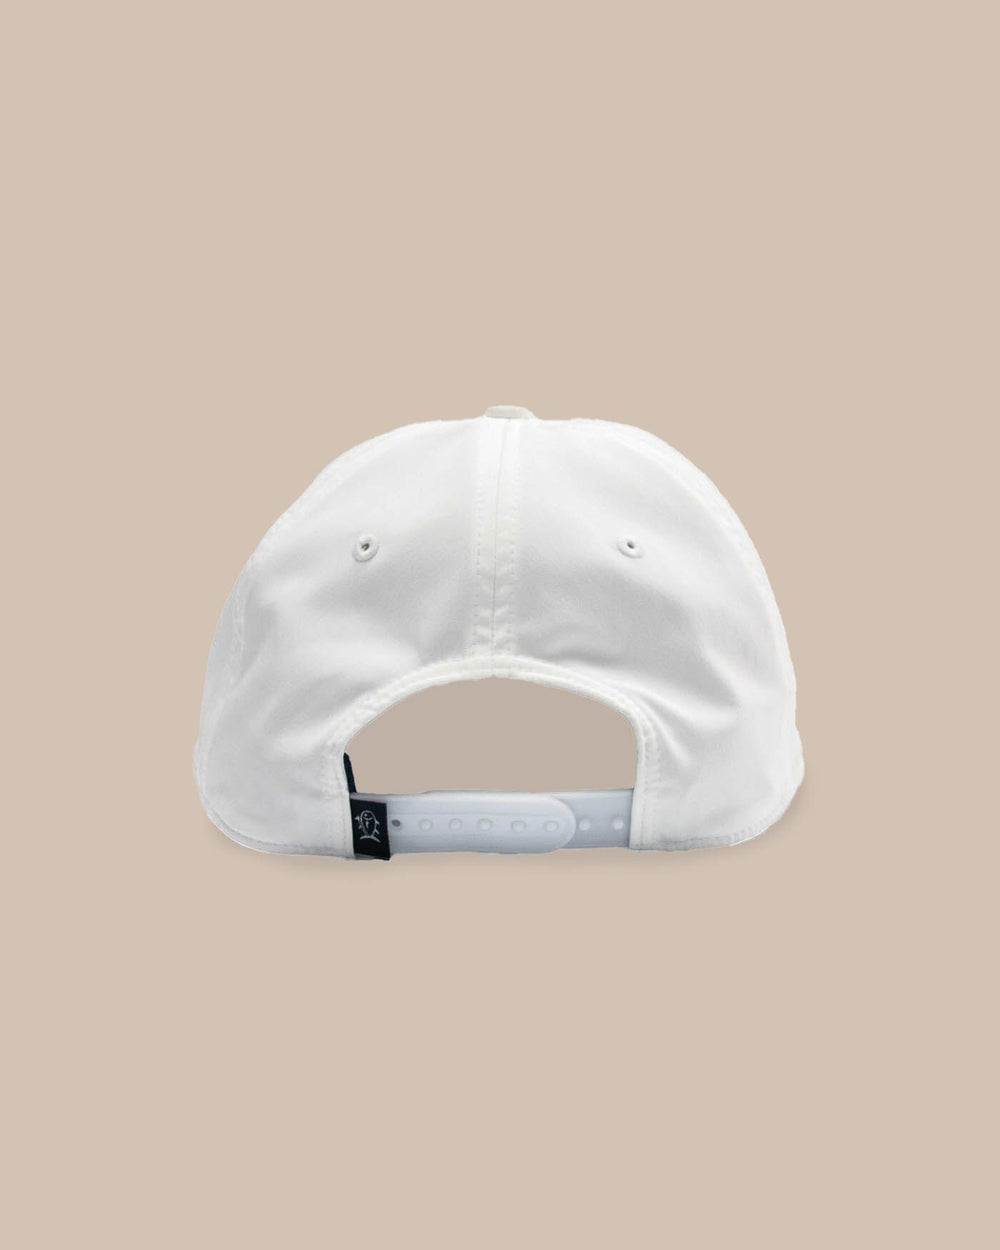 The back view of the Southern Tide 18 Holes 5 Panel Hat by Southern Tide - White